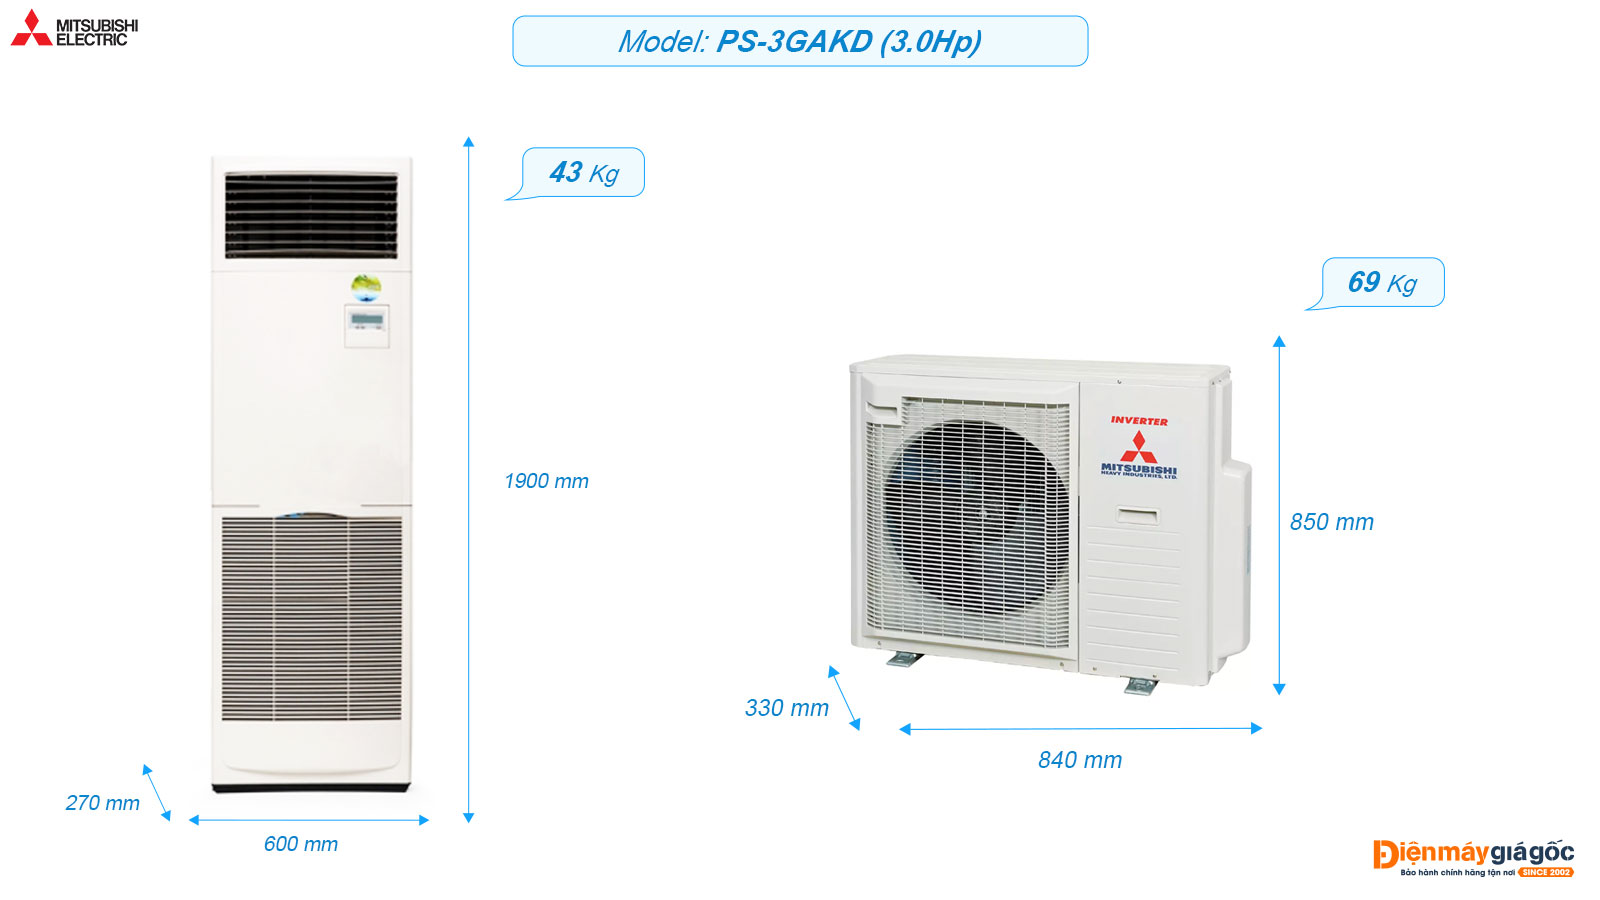 Mitsubishi Electric Floor standing air conditioning PS-3GAKD (3.0Hp)